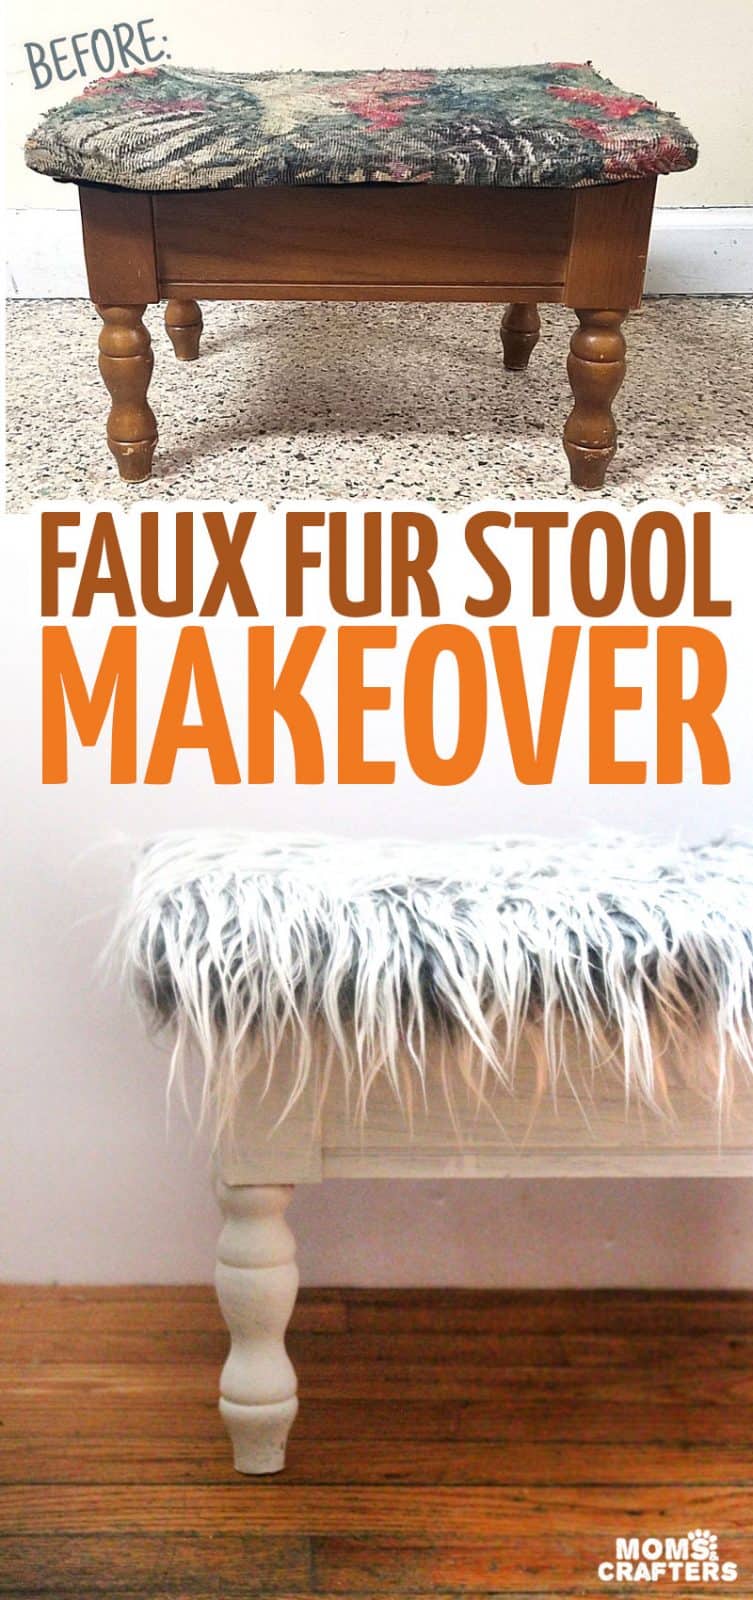 Give an old drab stool a faux fur makeover